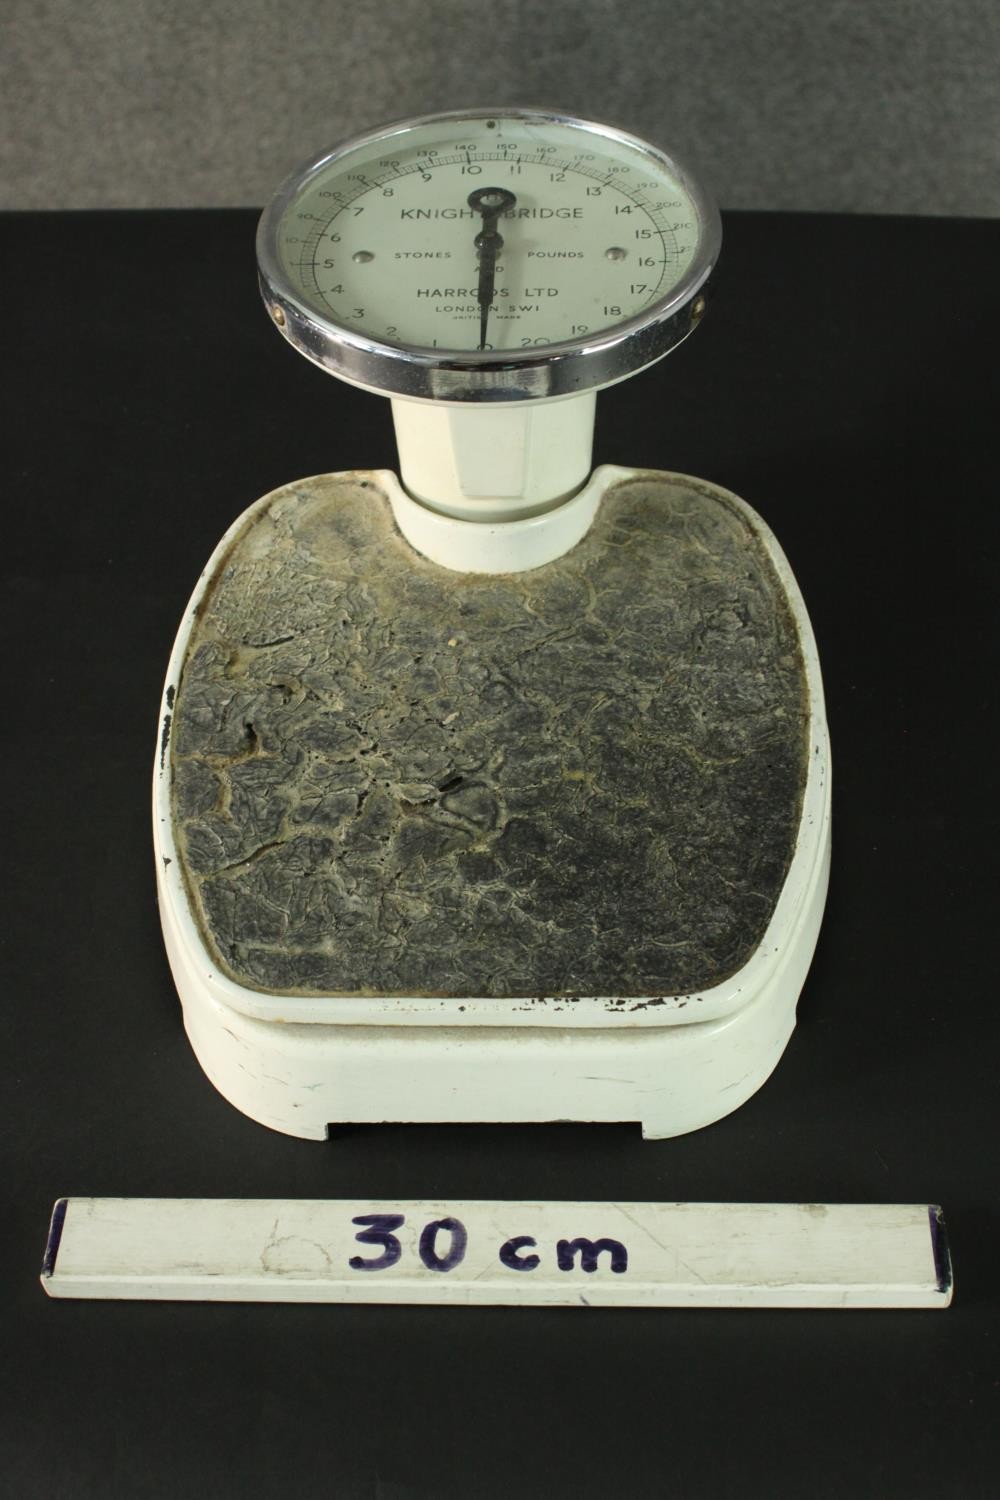 A set of Harrods Limited 'The Knightsbridge' bathroom scales, with a white enamel body, in stones - Image 2 of 4